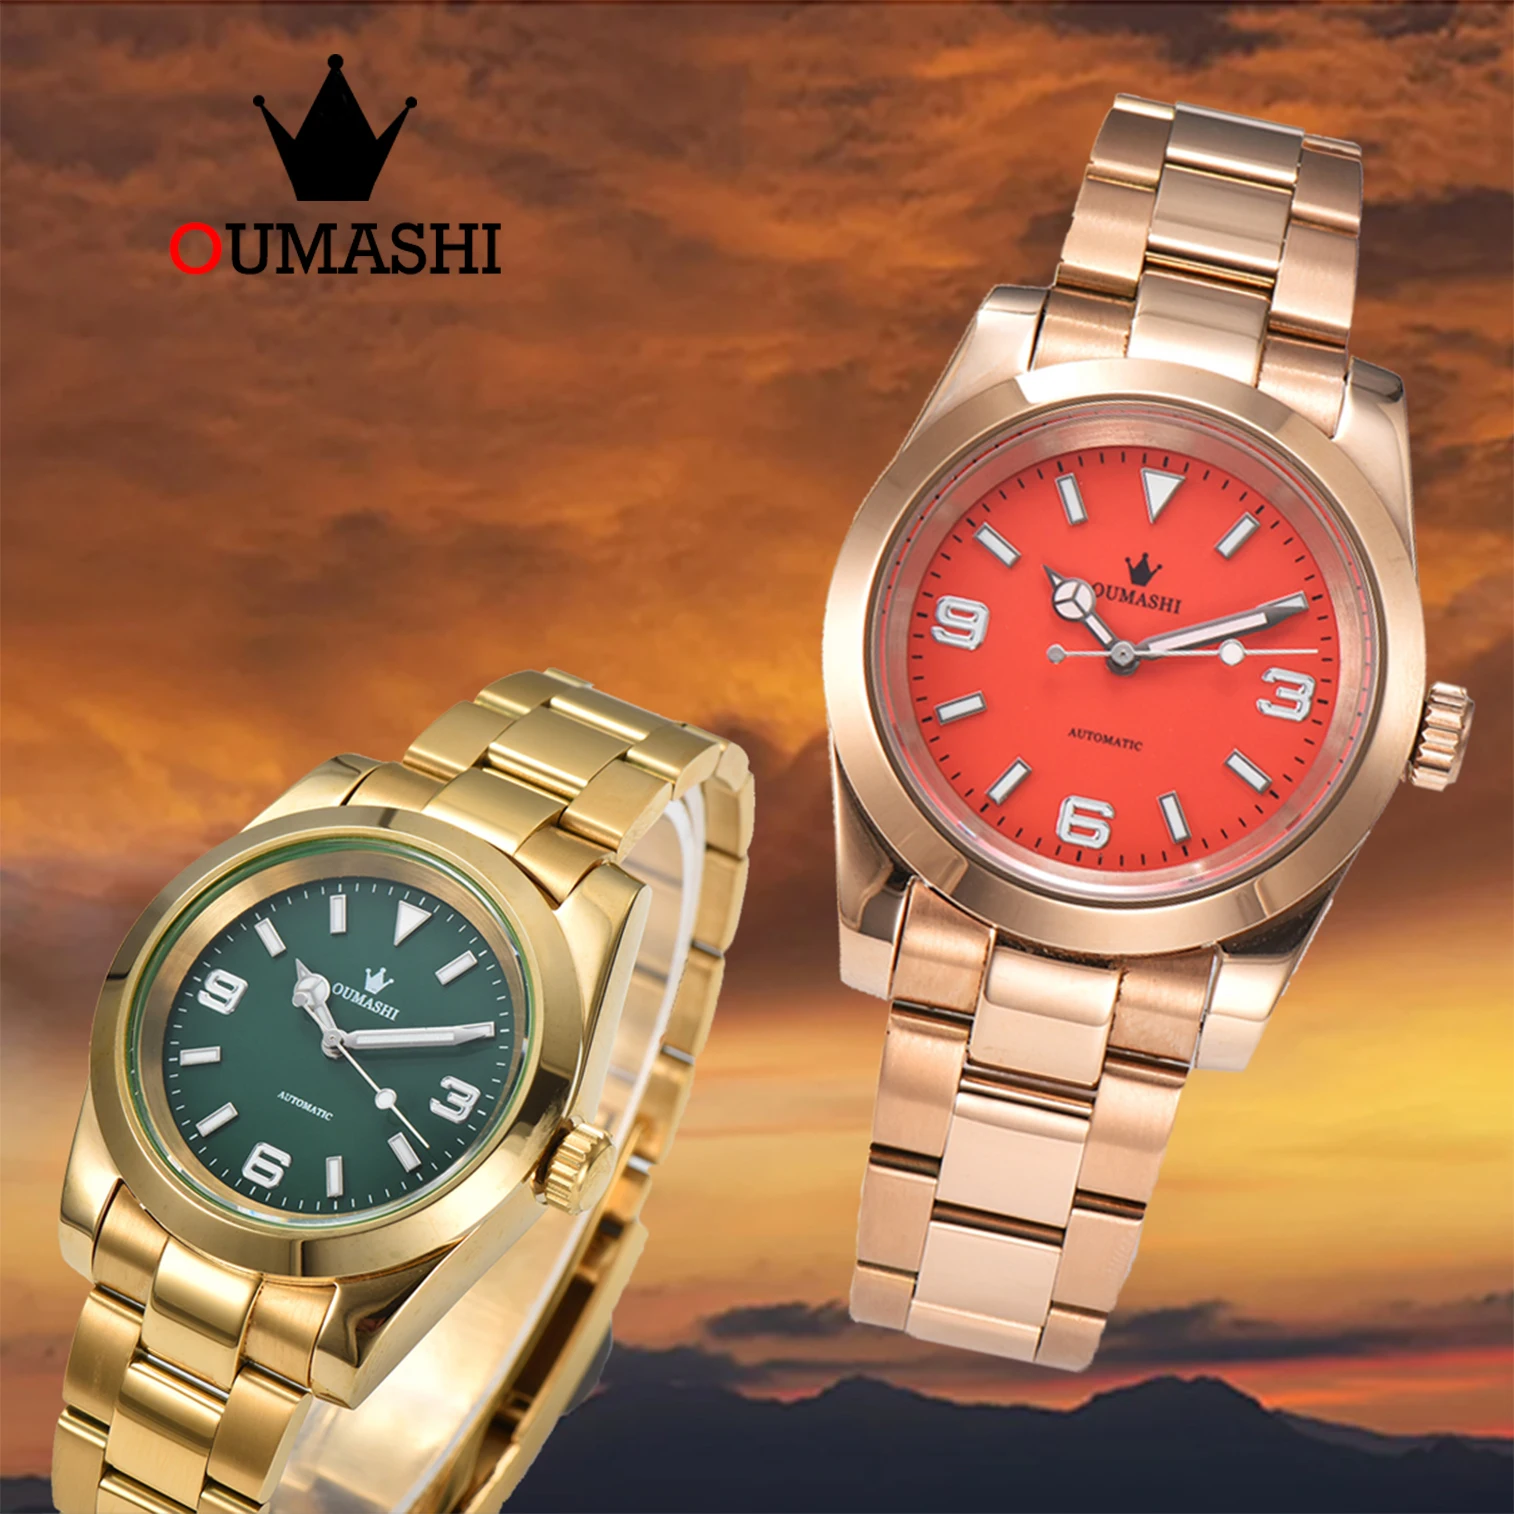 39mm-men's-watch-nh35-watches-customisable-logo-automatic-mechanical-watches-stainless-sapphire-glass-100-metres-water-resistant